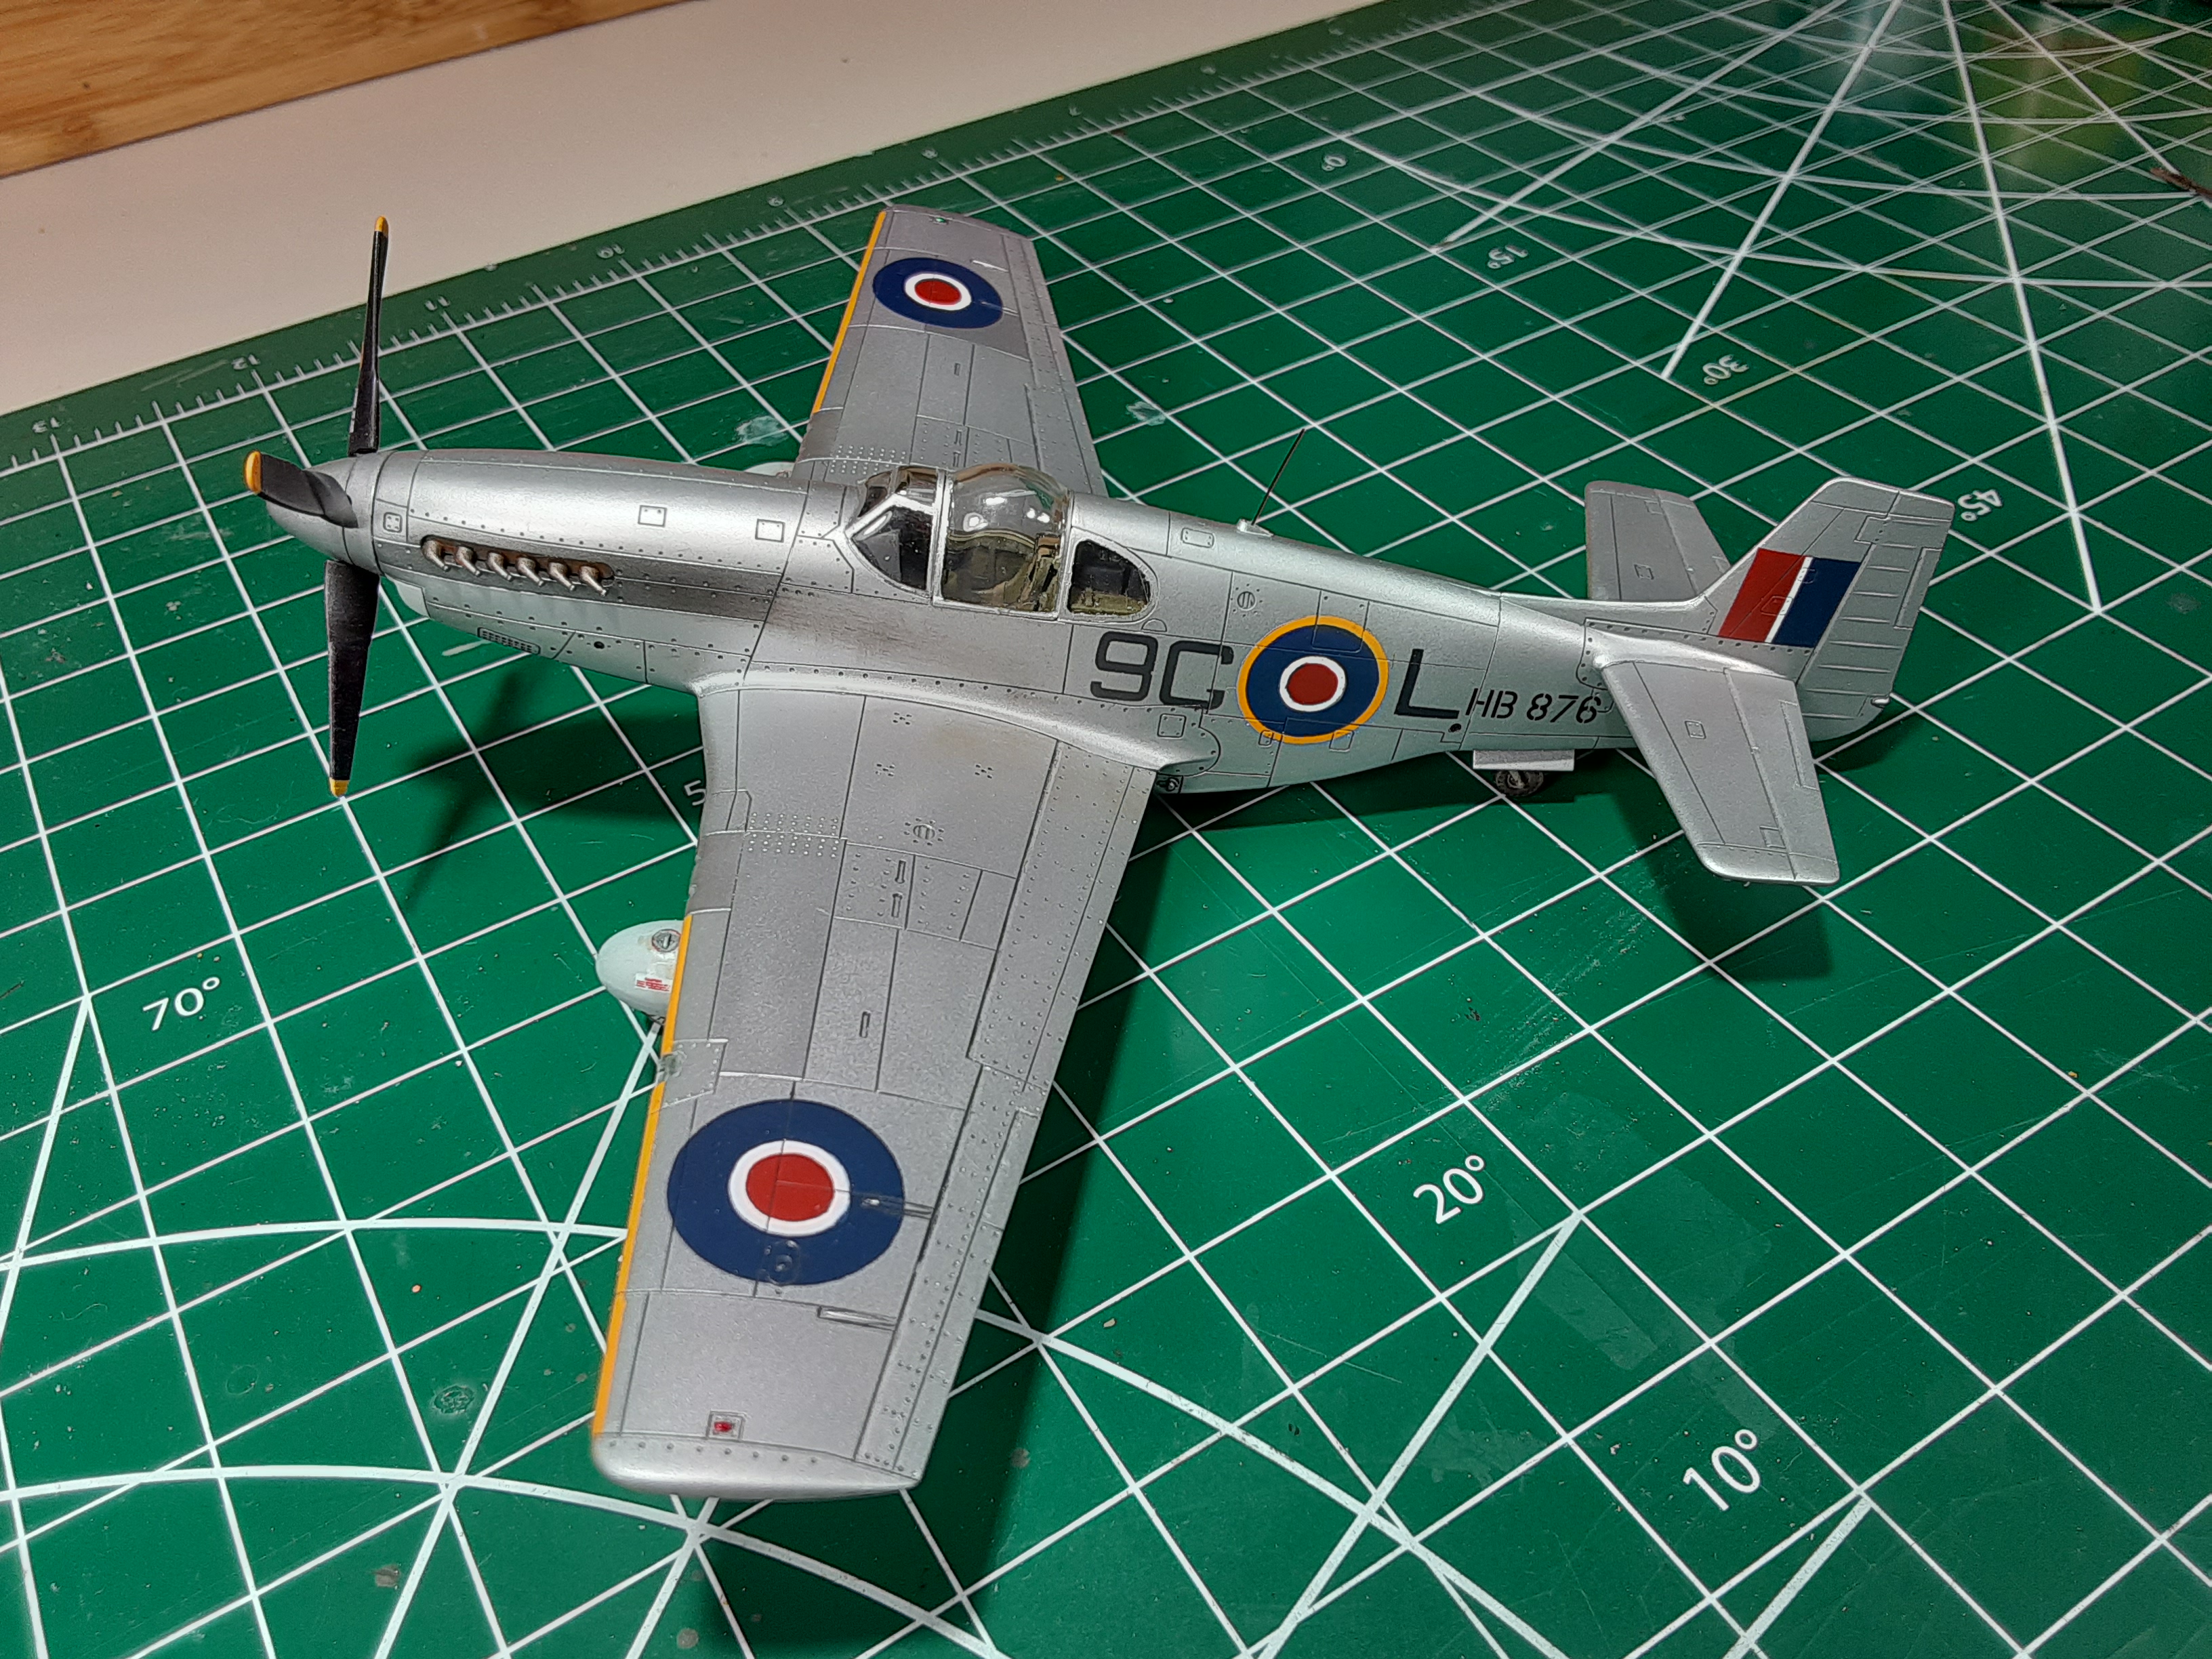 441 Squadron Mustang